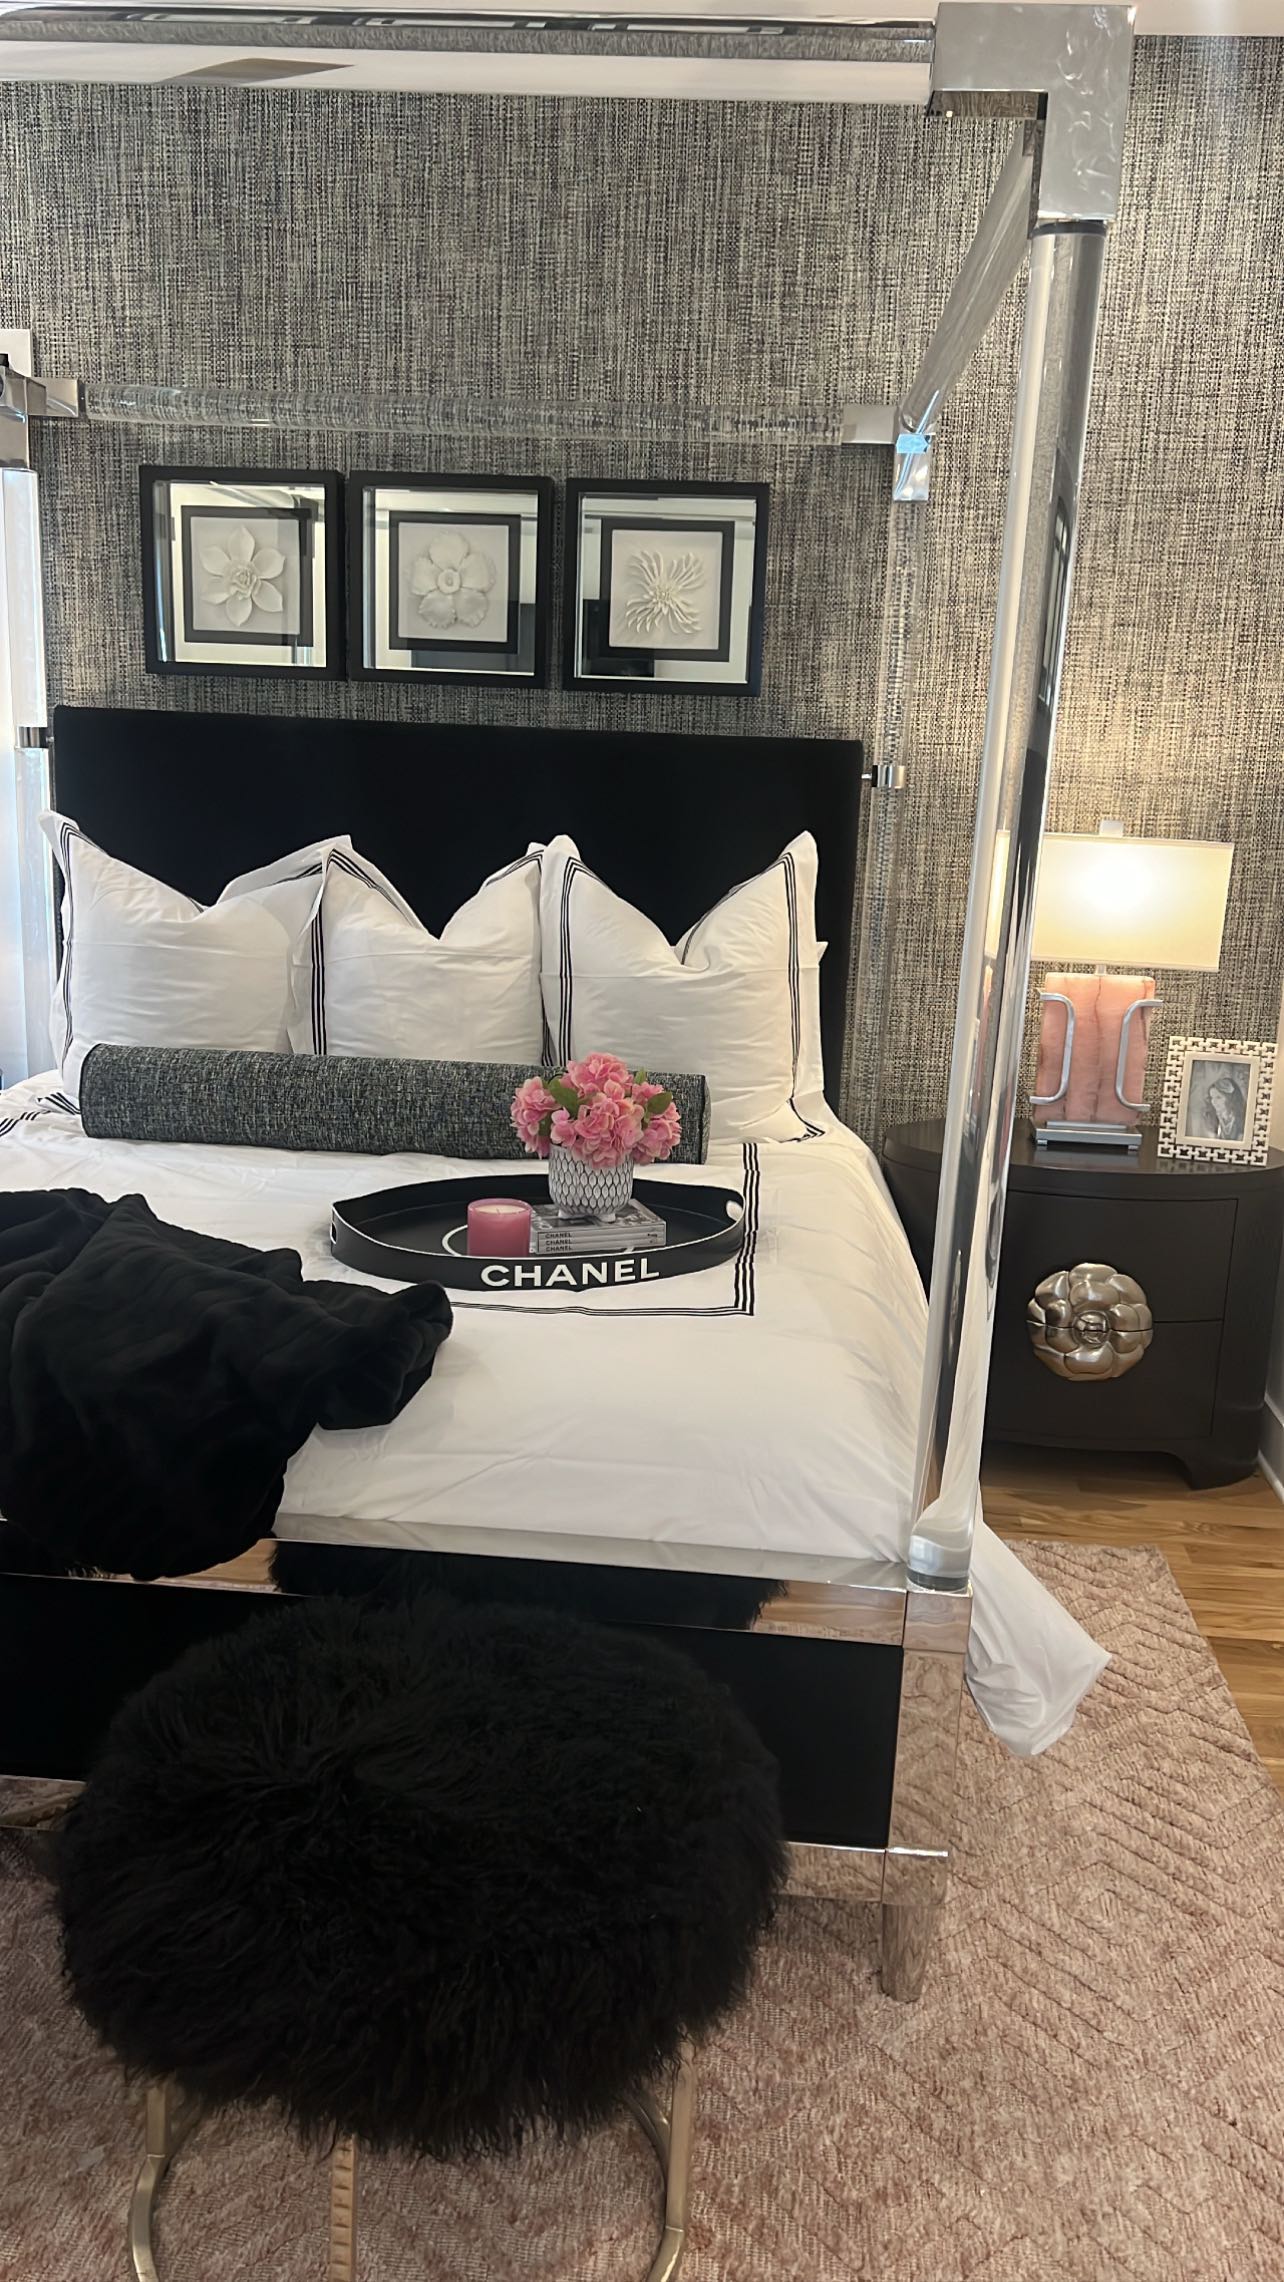 #Sneakpeek into a recent client installation in #Nashville. From a classically chic #colorpalette to all of the fashionable #designdetails, #teamIBB nailed our client’s request for a girly and inviting #guestbedroom. What’s your favorite part of the design? #bedroomdesign #travelingdesigner #chicbedroom #wallpaperWednesday #allthedetails #Nashvilledesign #howdoilook #Nashvillelooksgoodonyou #Ibbdesign